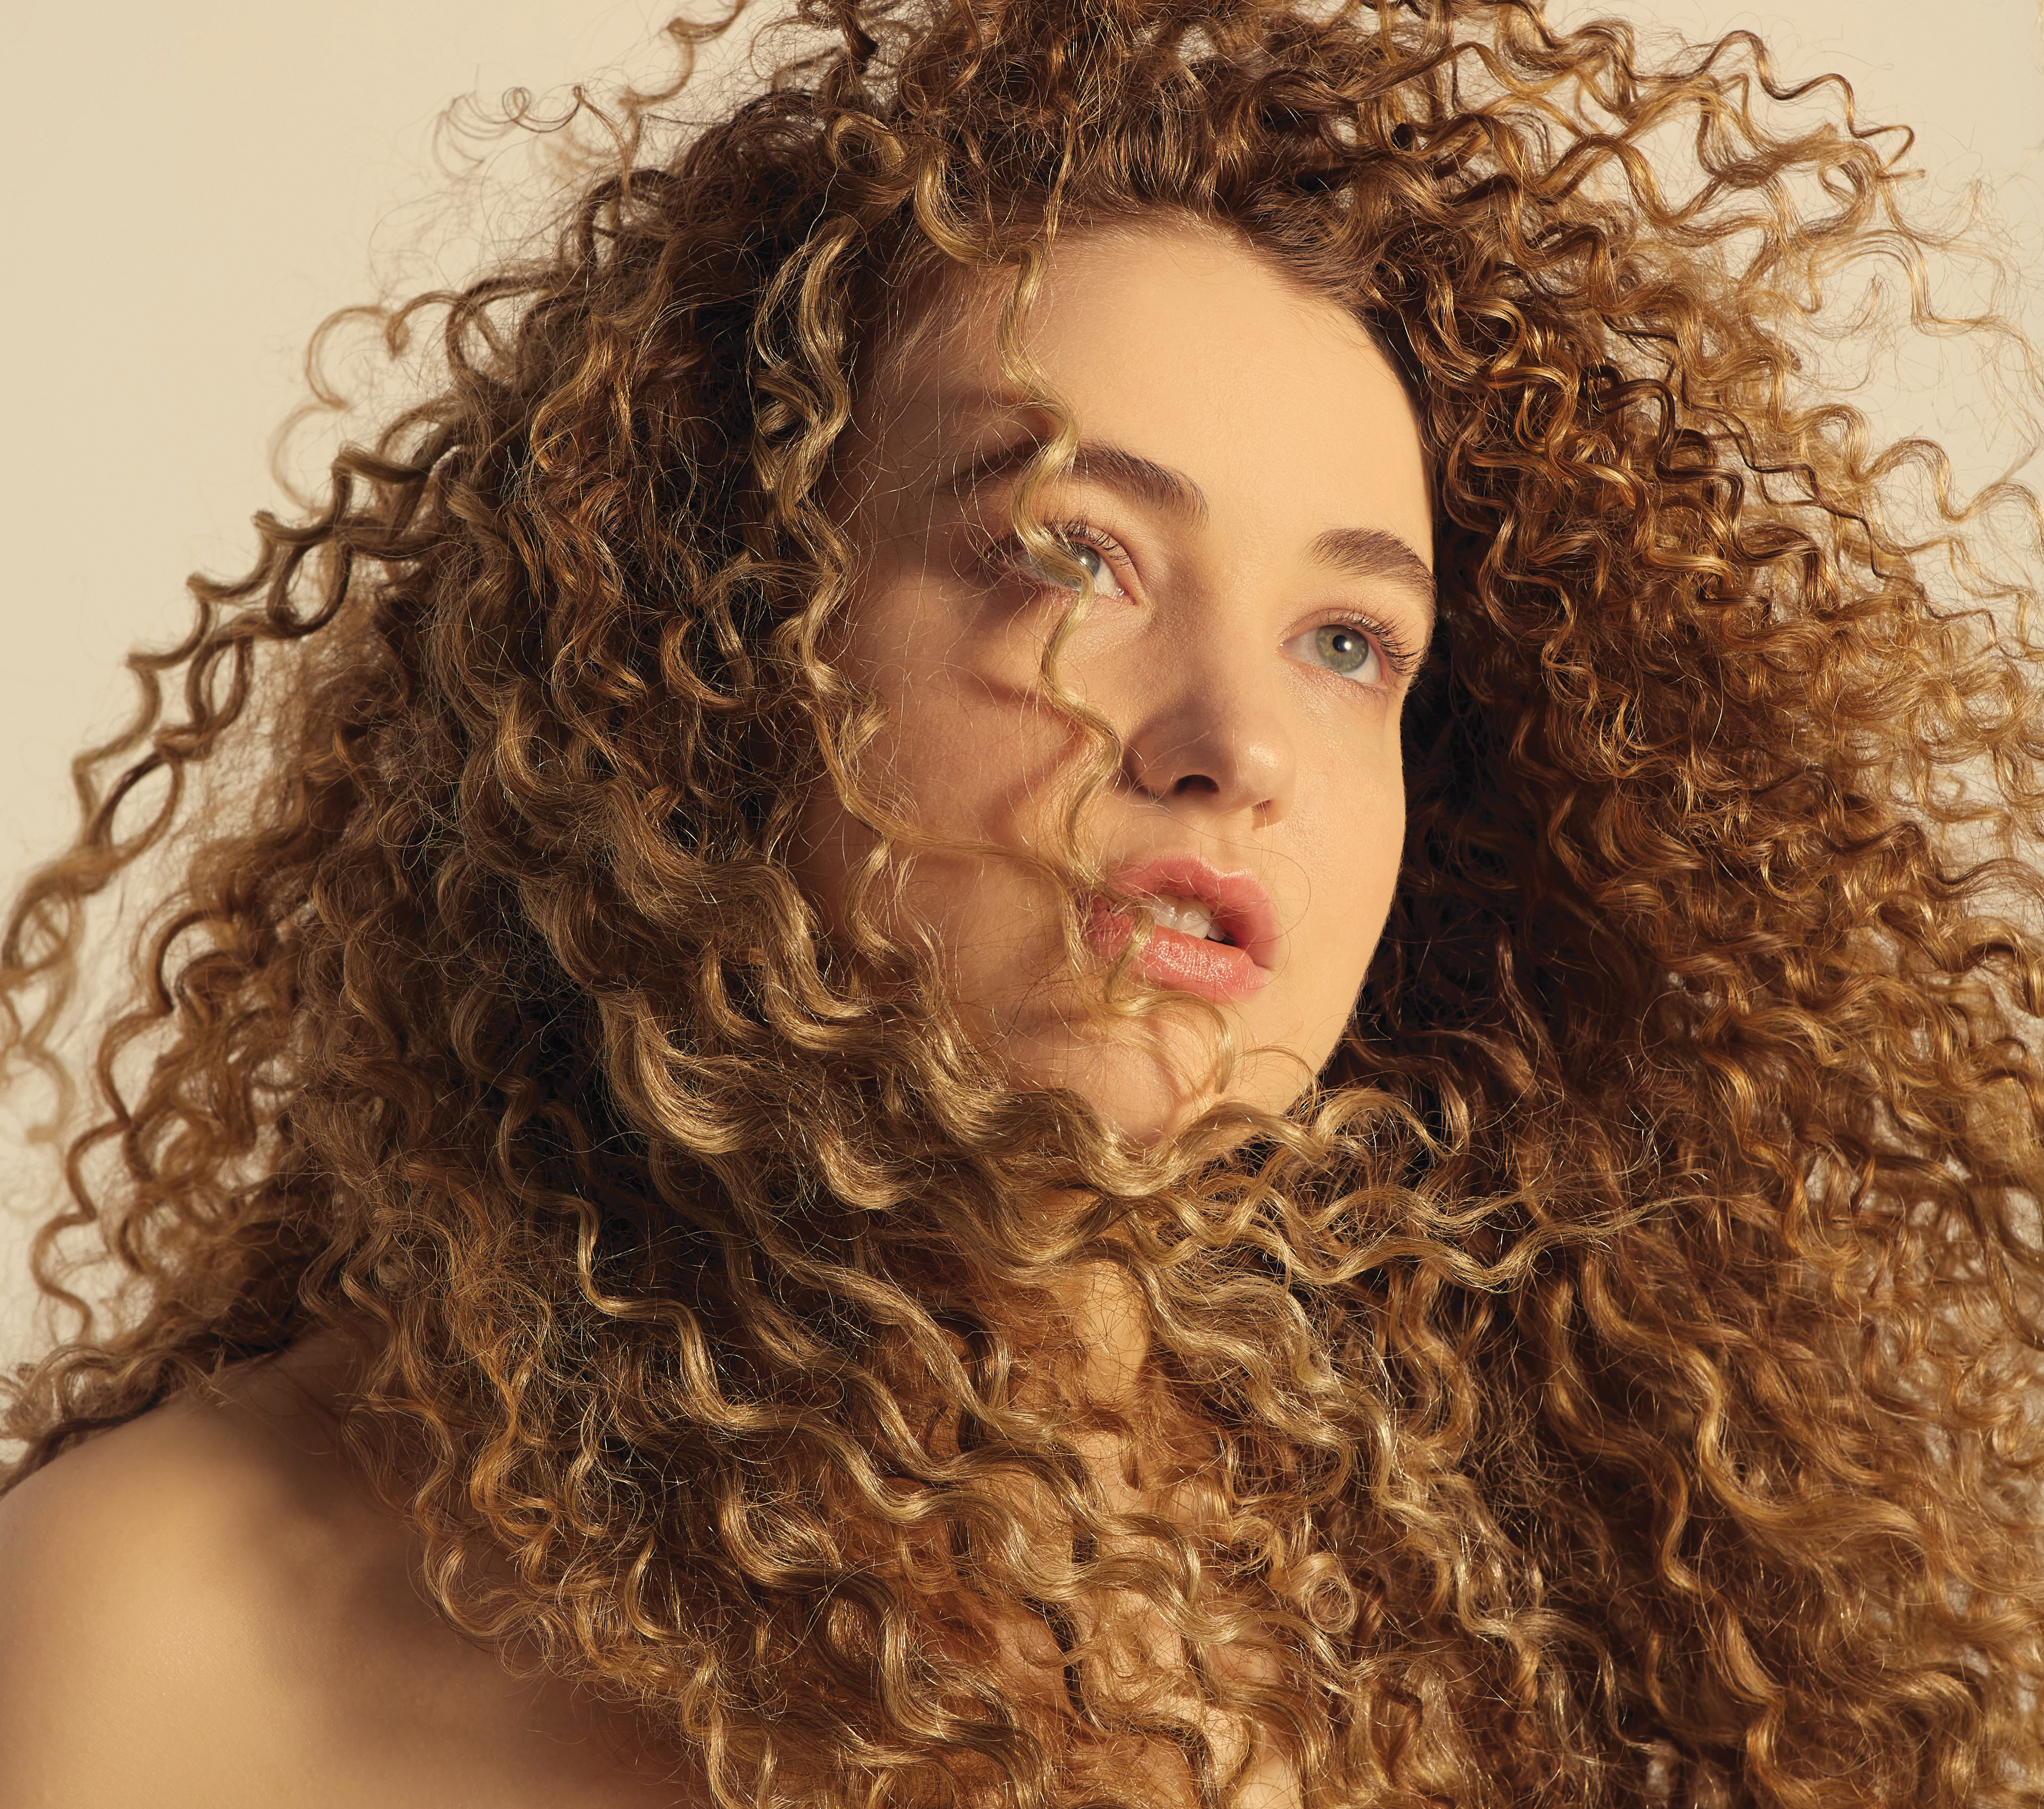 Interview: Tal Wilkenfeld on ‘Love Remains,’ Collaborating with Prince and More